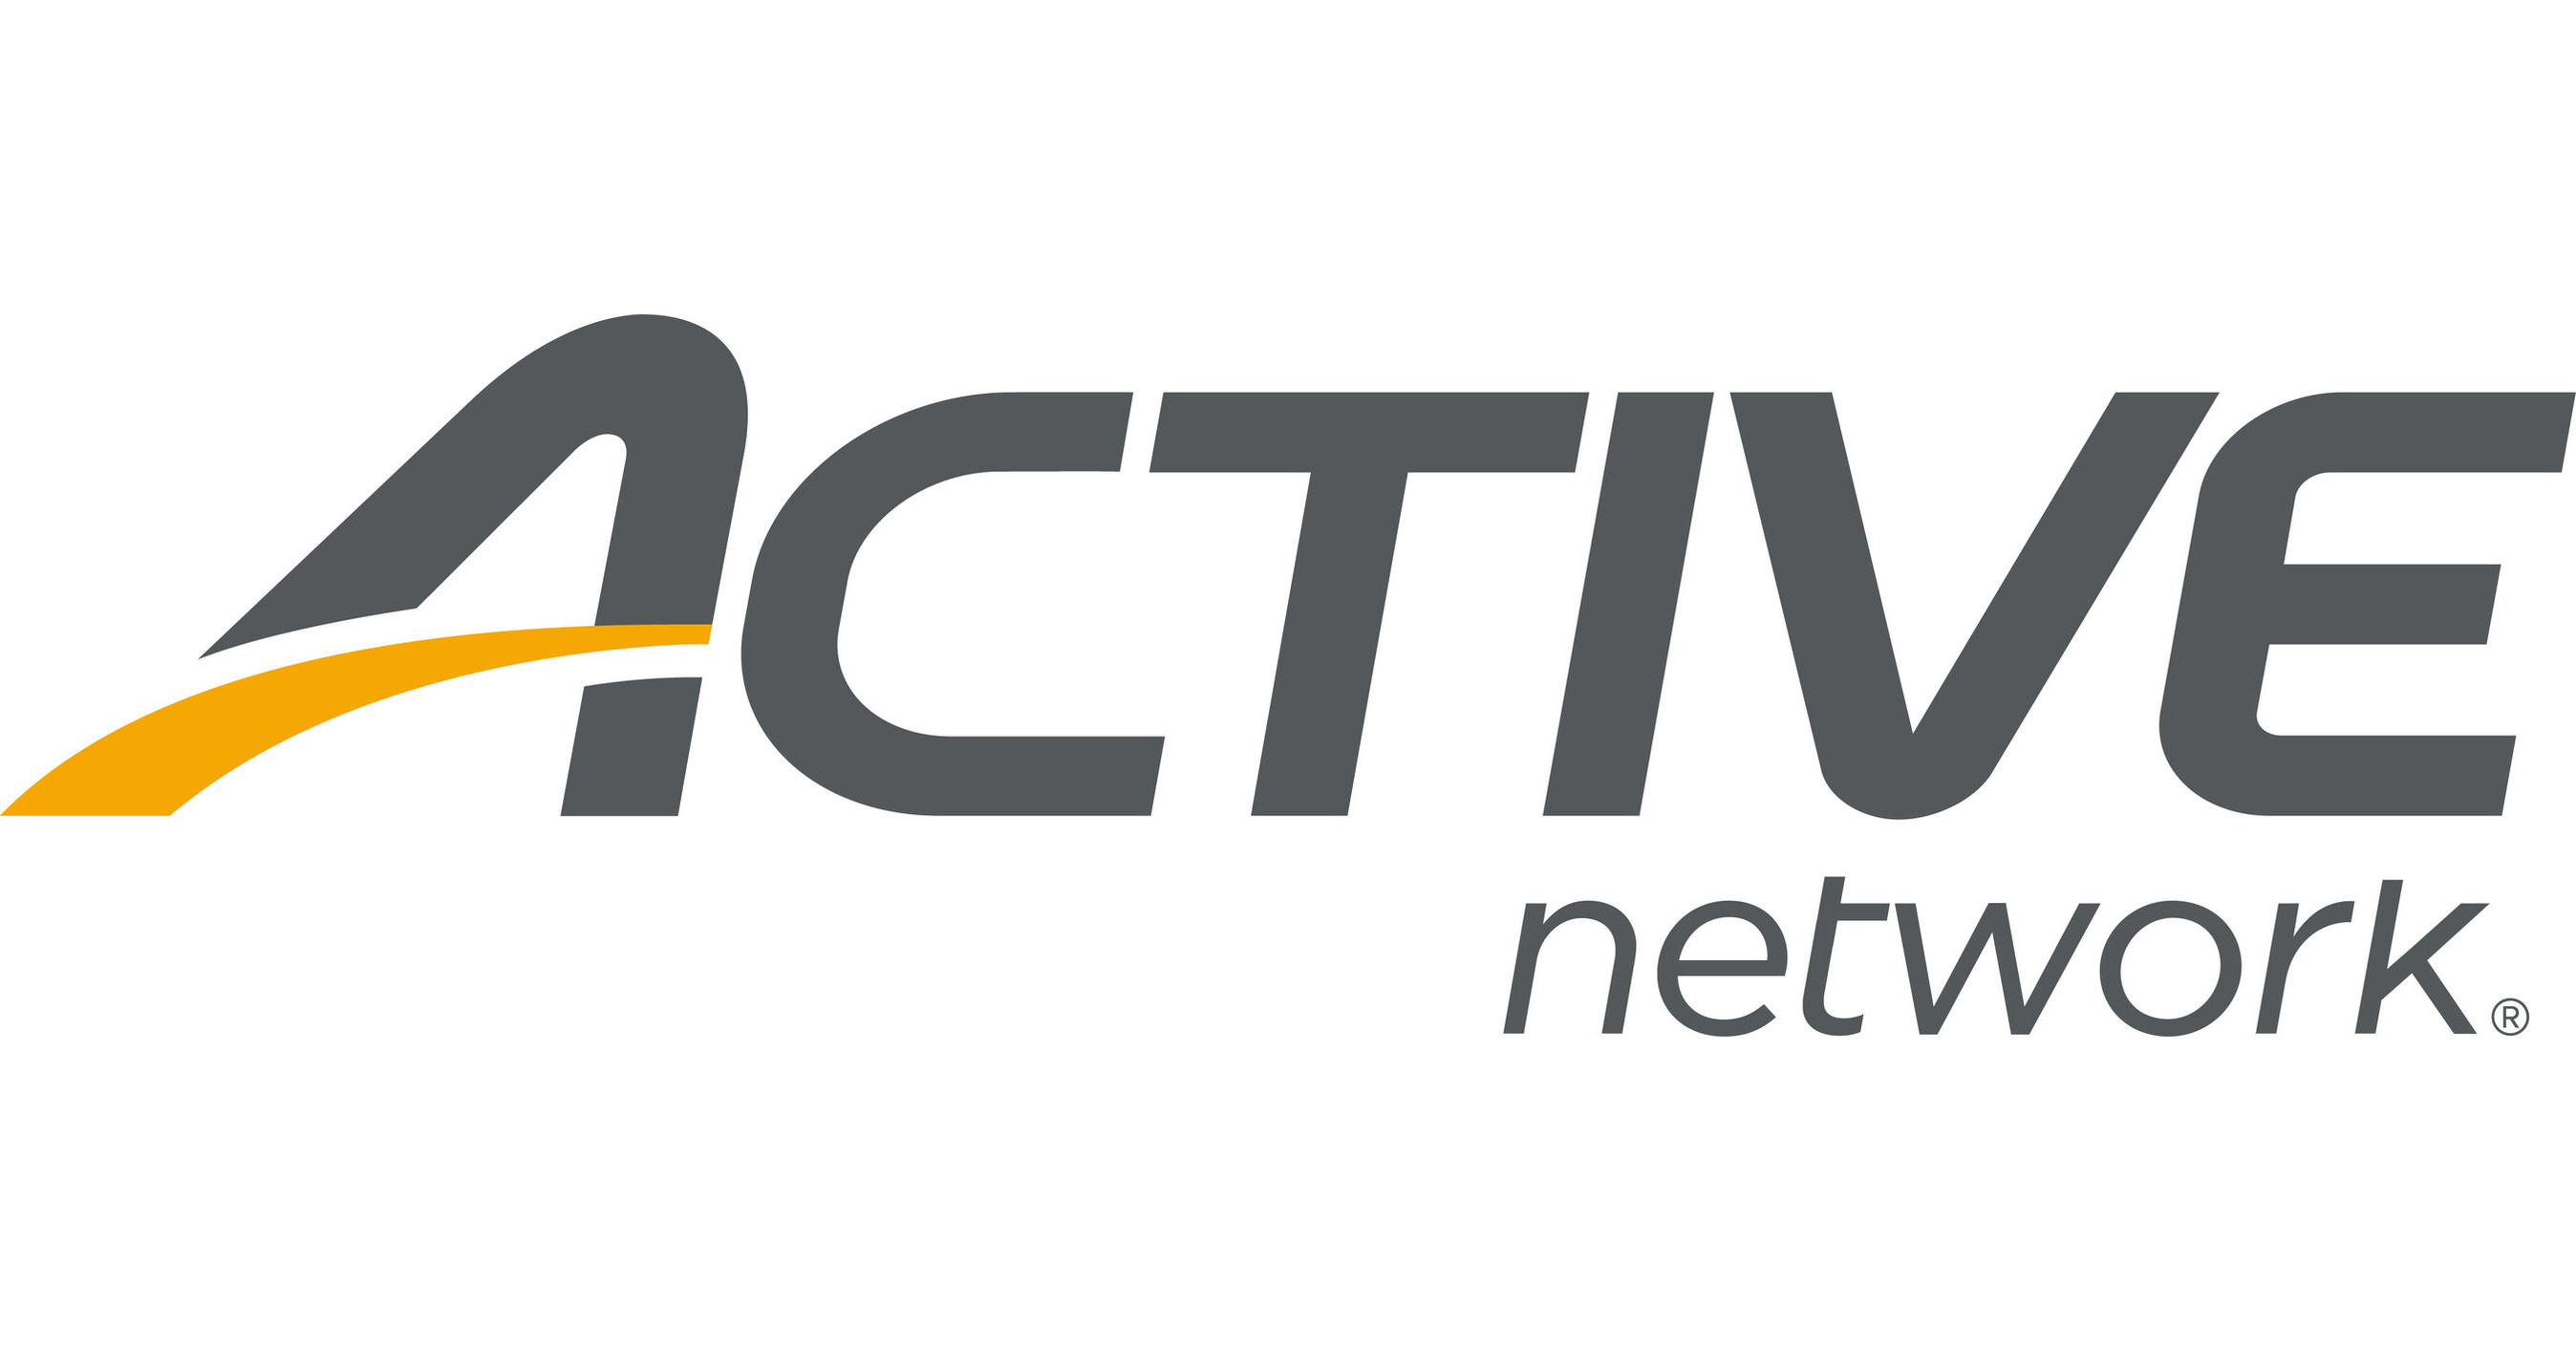 Activity now. Active Network. Active. Active Base картинка. Global Network activity.